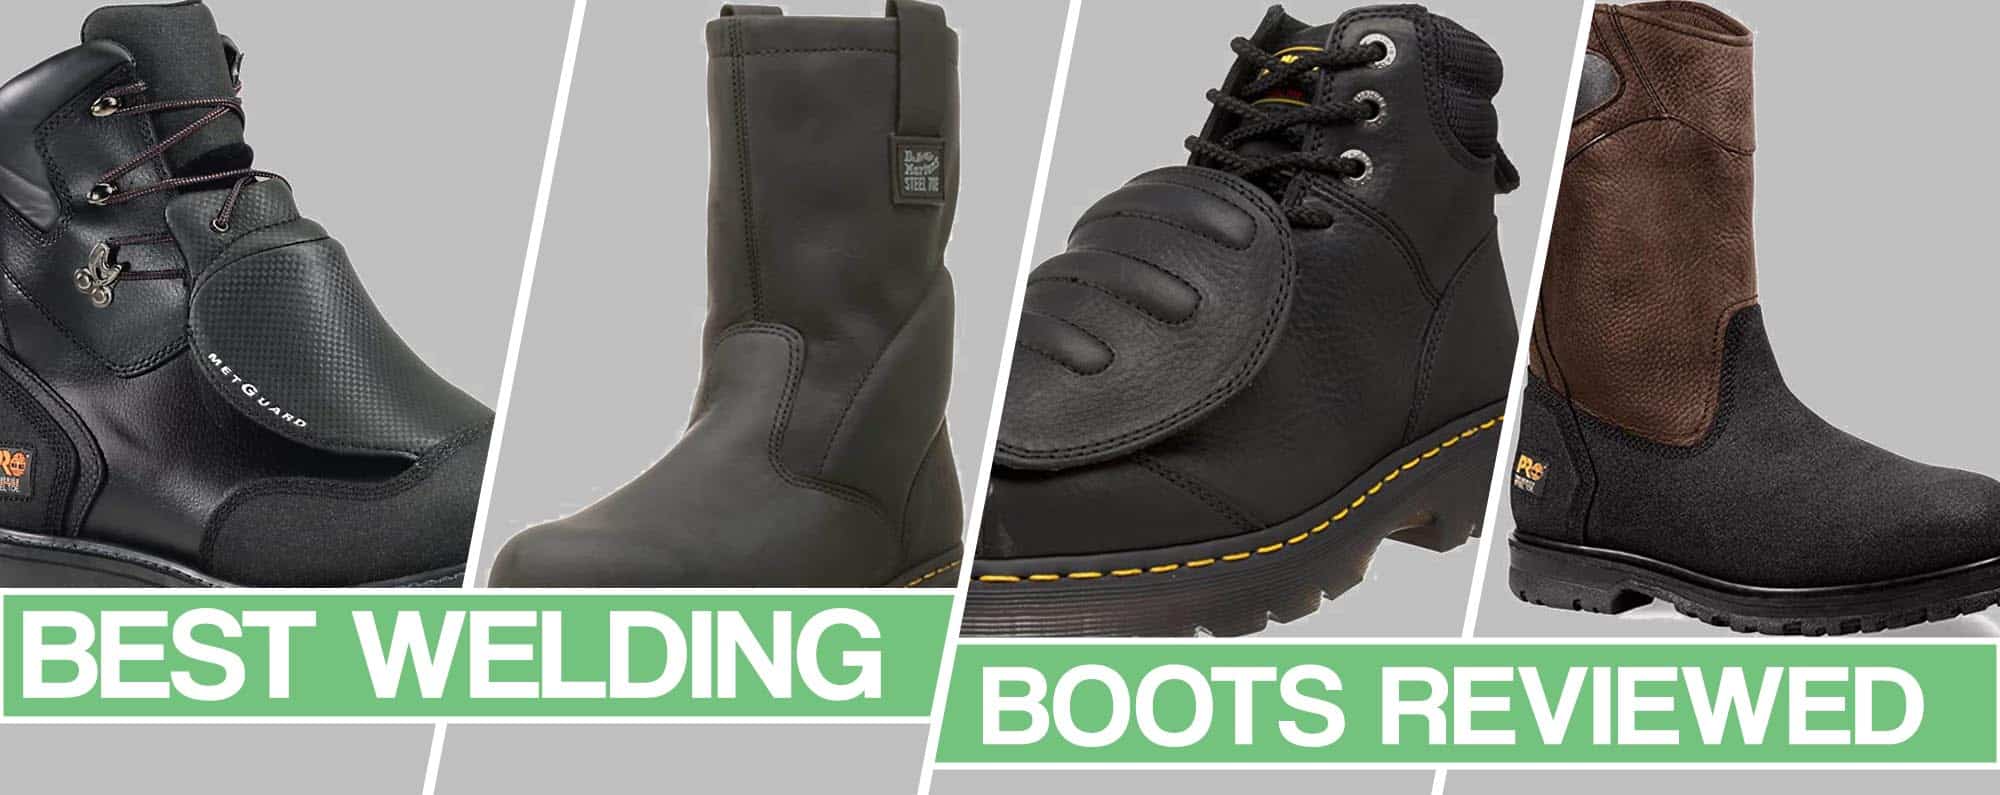 image of the best welding boots